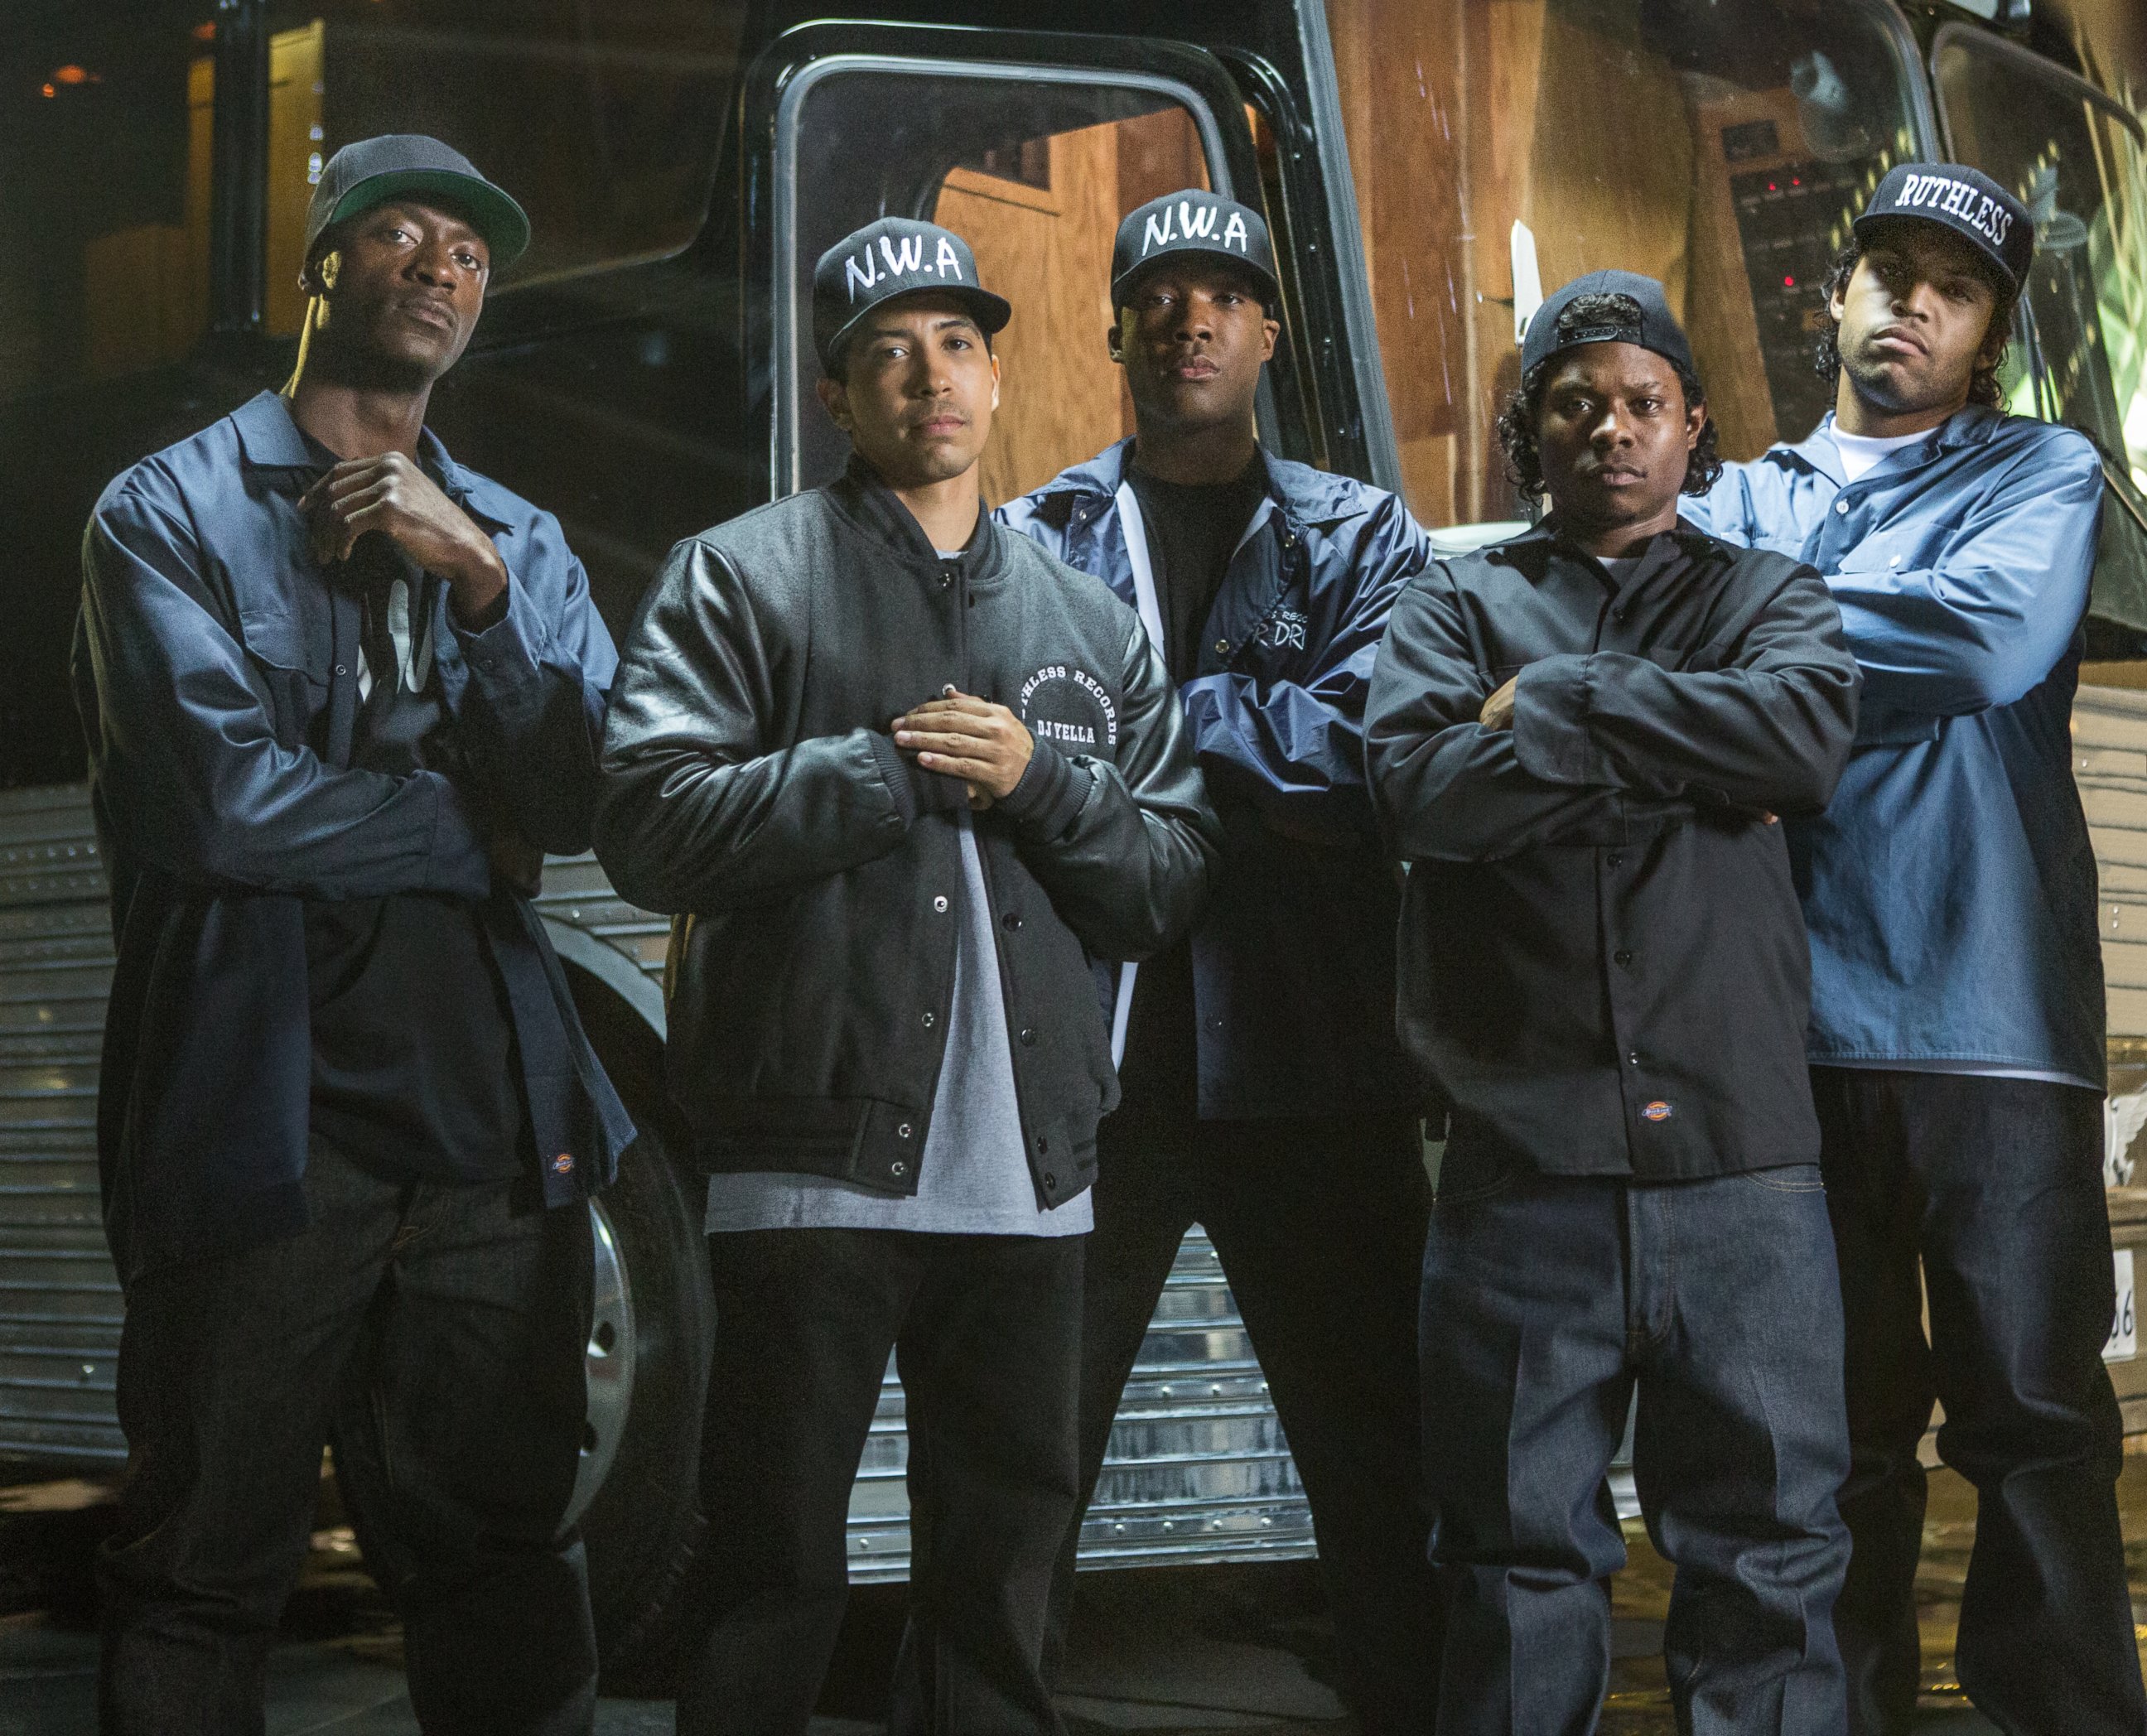 PHOTO:Aldis Hodge, Neil Brown, Jr., Corey Hawkins, Jason Mitchell, and O'Shea Jackson, Jr. as members of N.W.A in this undated film still from the film "Straight Outta Compton." 